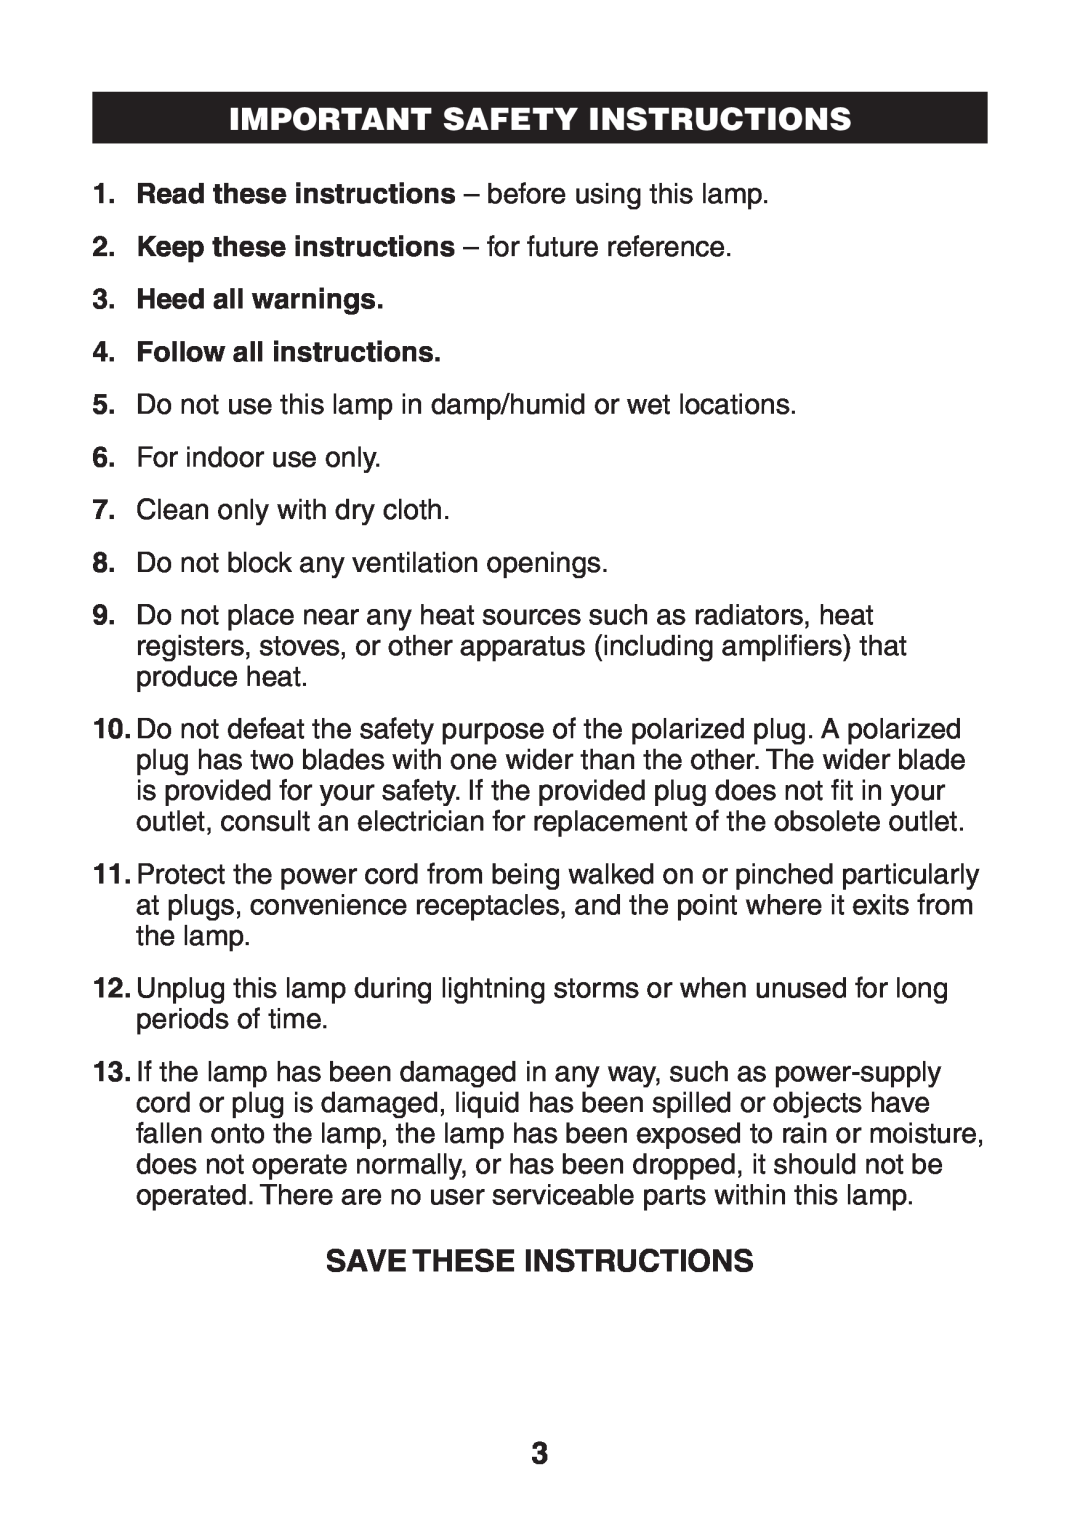 Verilux VT04 manual Save These Instructions, Keep these instructions - for future reference, Important Safety Instructions 